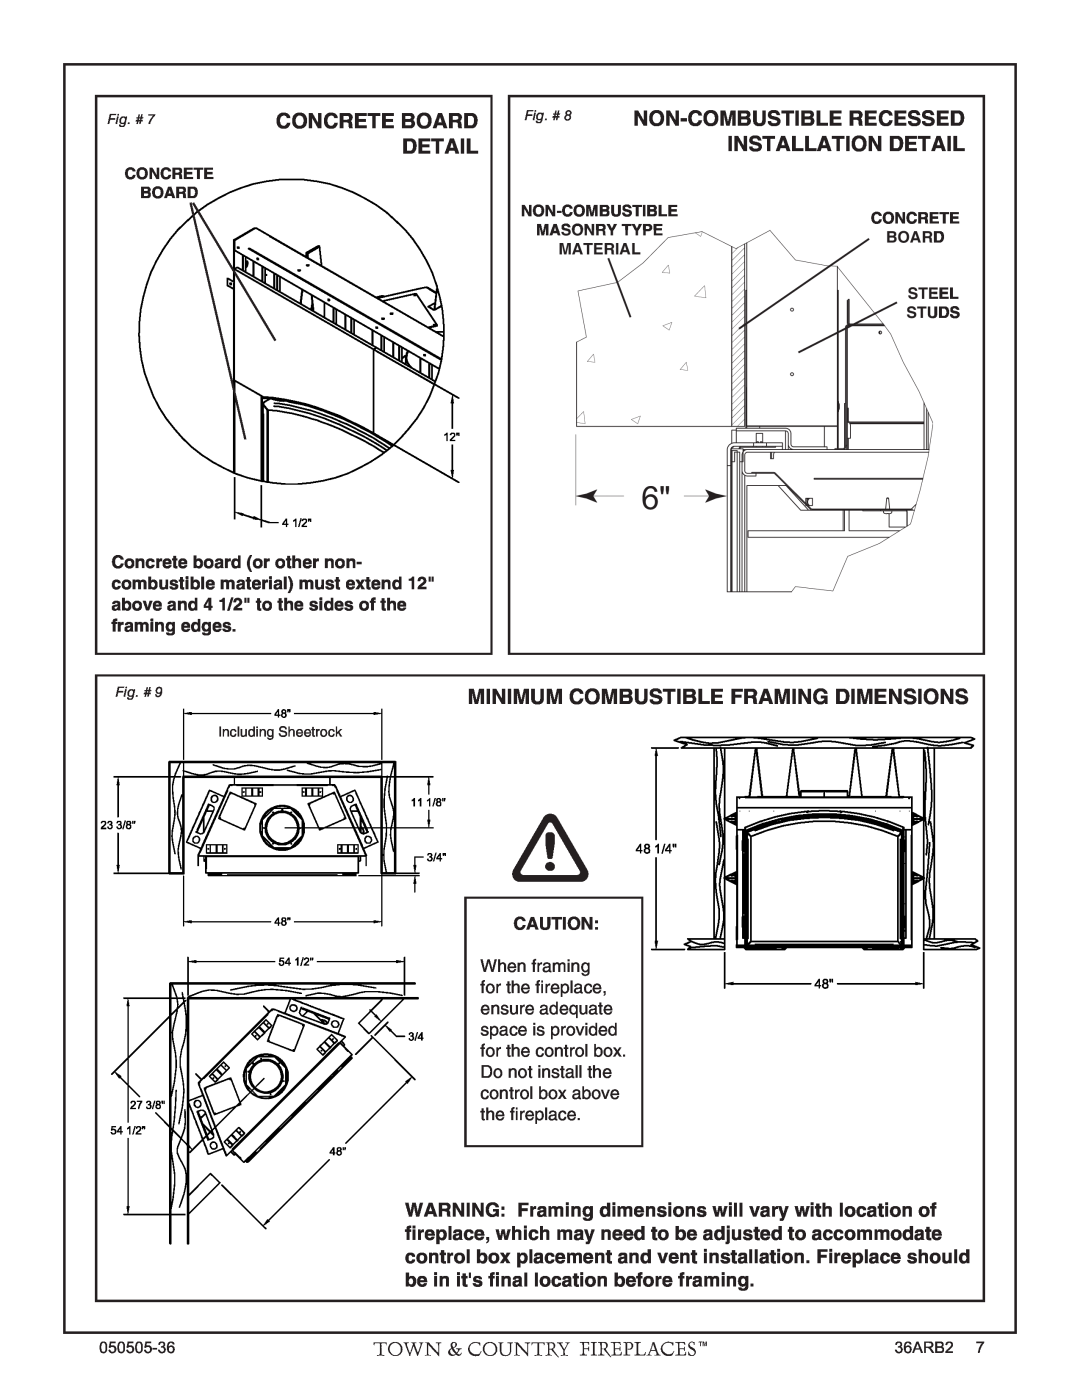 PGS TC36 AR manual Fig. # 8 NON-COMBUSTIBLERECESSED, Installation Detail, Minimum Combustible Framing Dimensions 